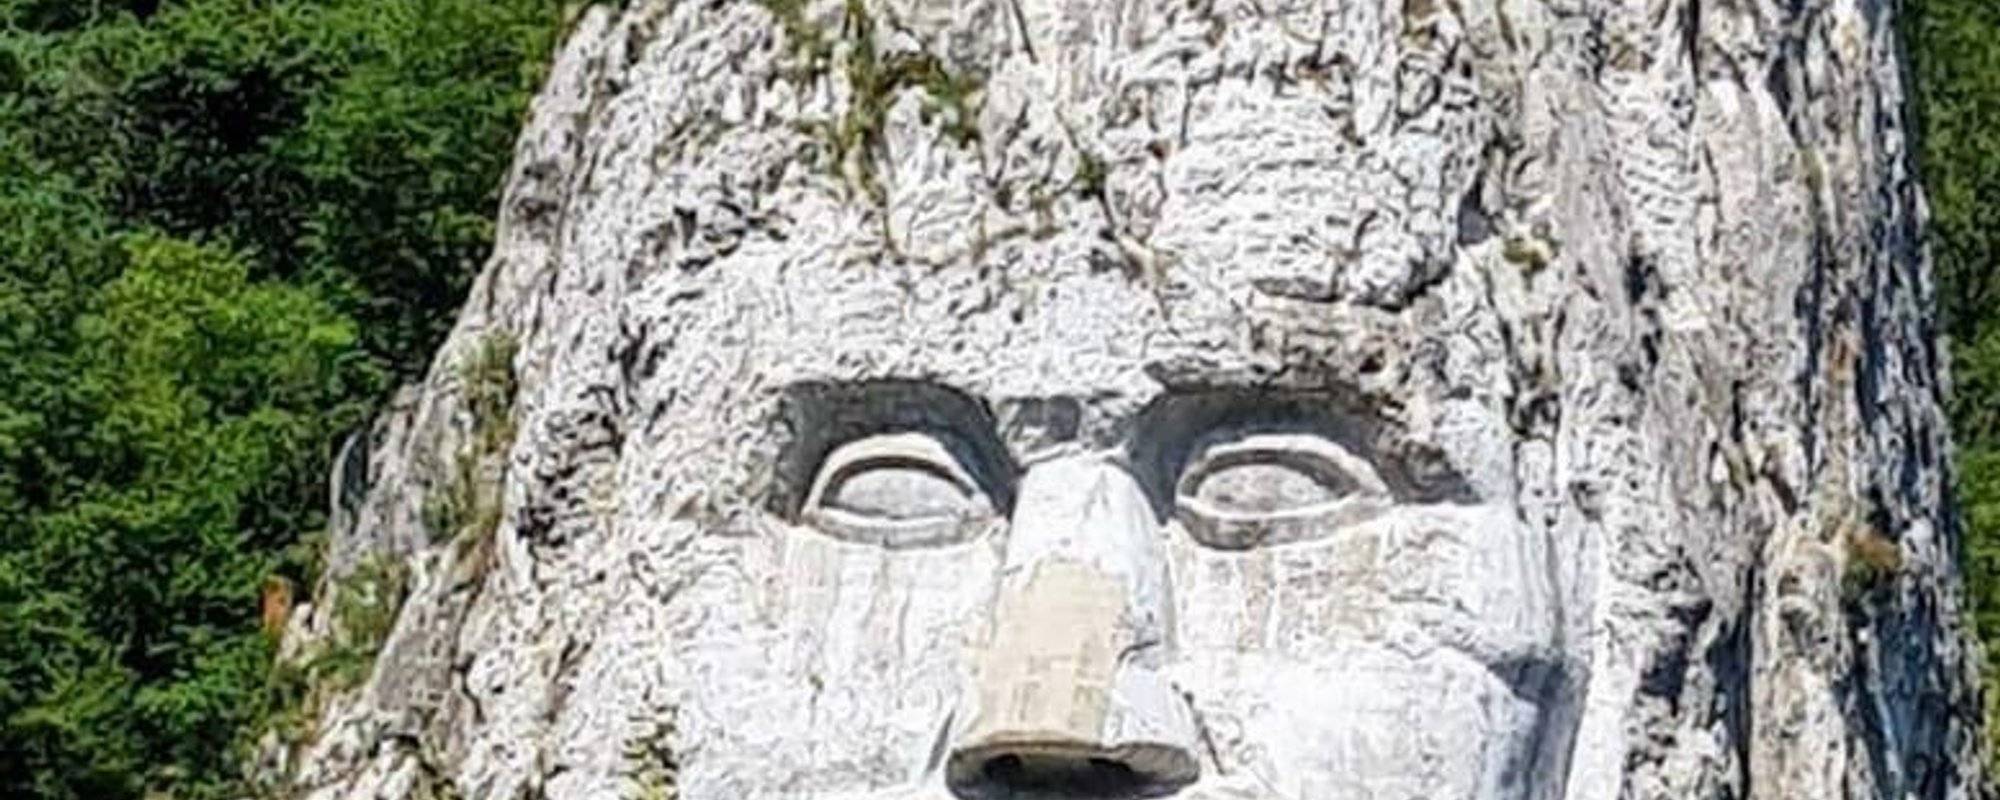 The statue of Decebal, the largest stone sculpture in Romania